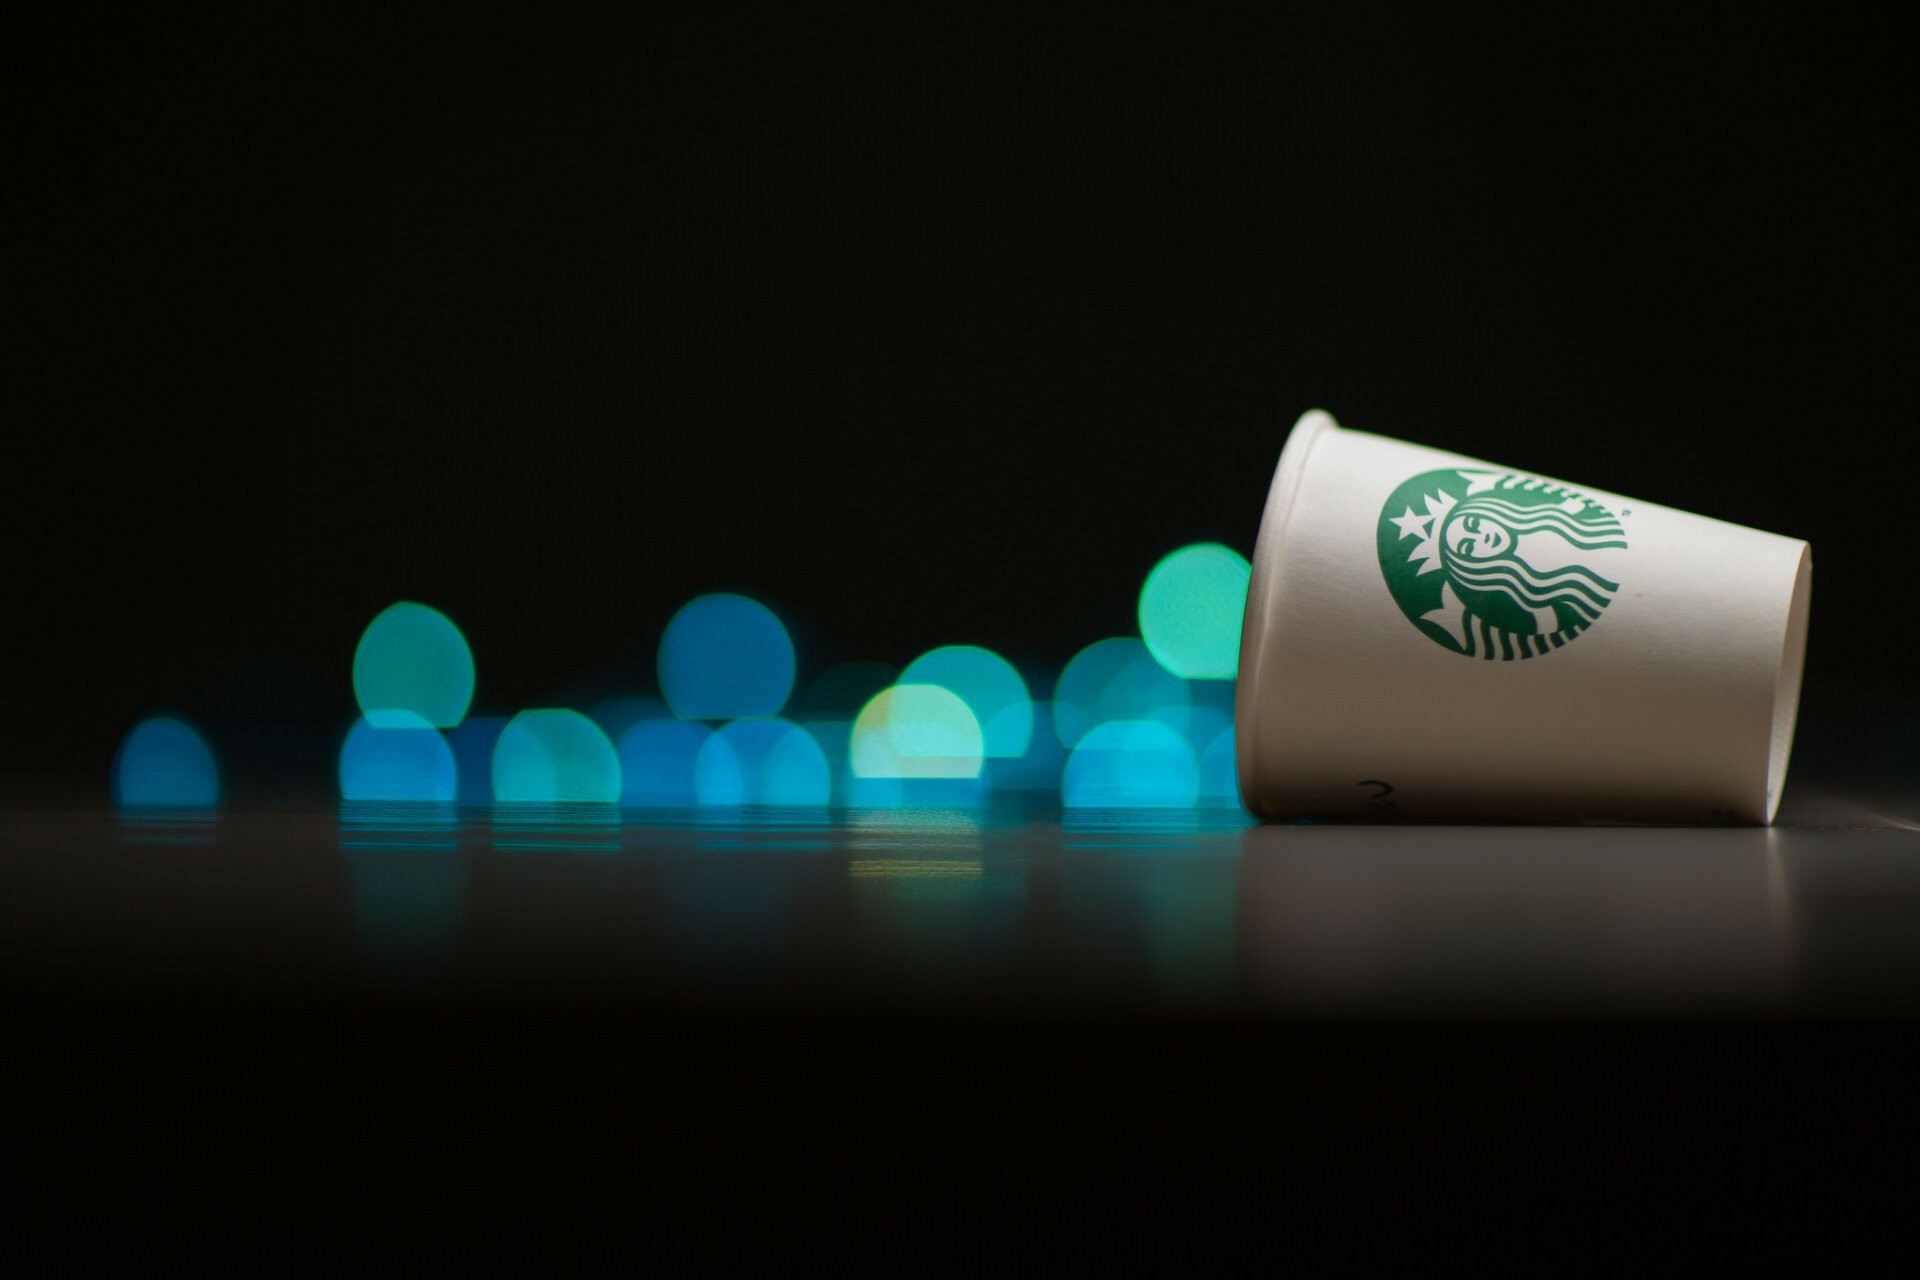 Starbucks: The most recognizable coffee brand in the world. 1920x1280 HD Wallpaper.